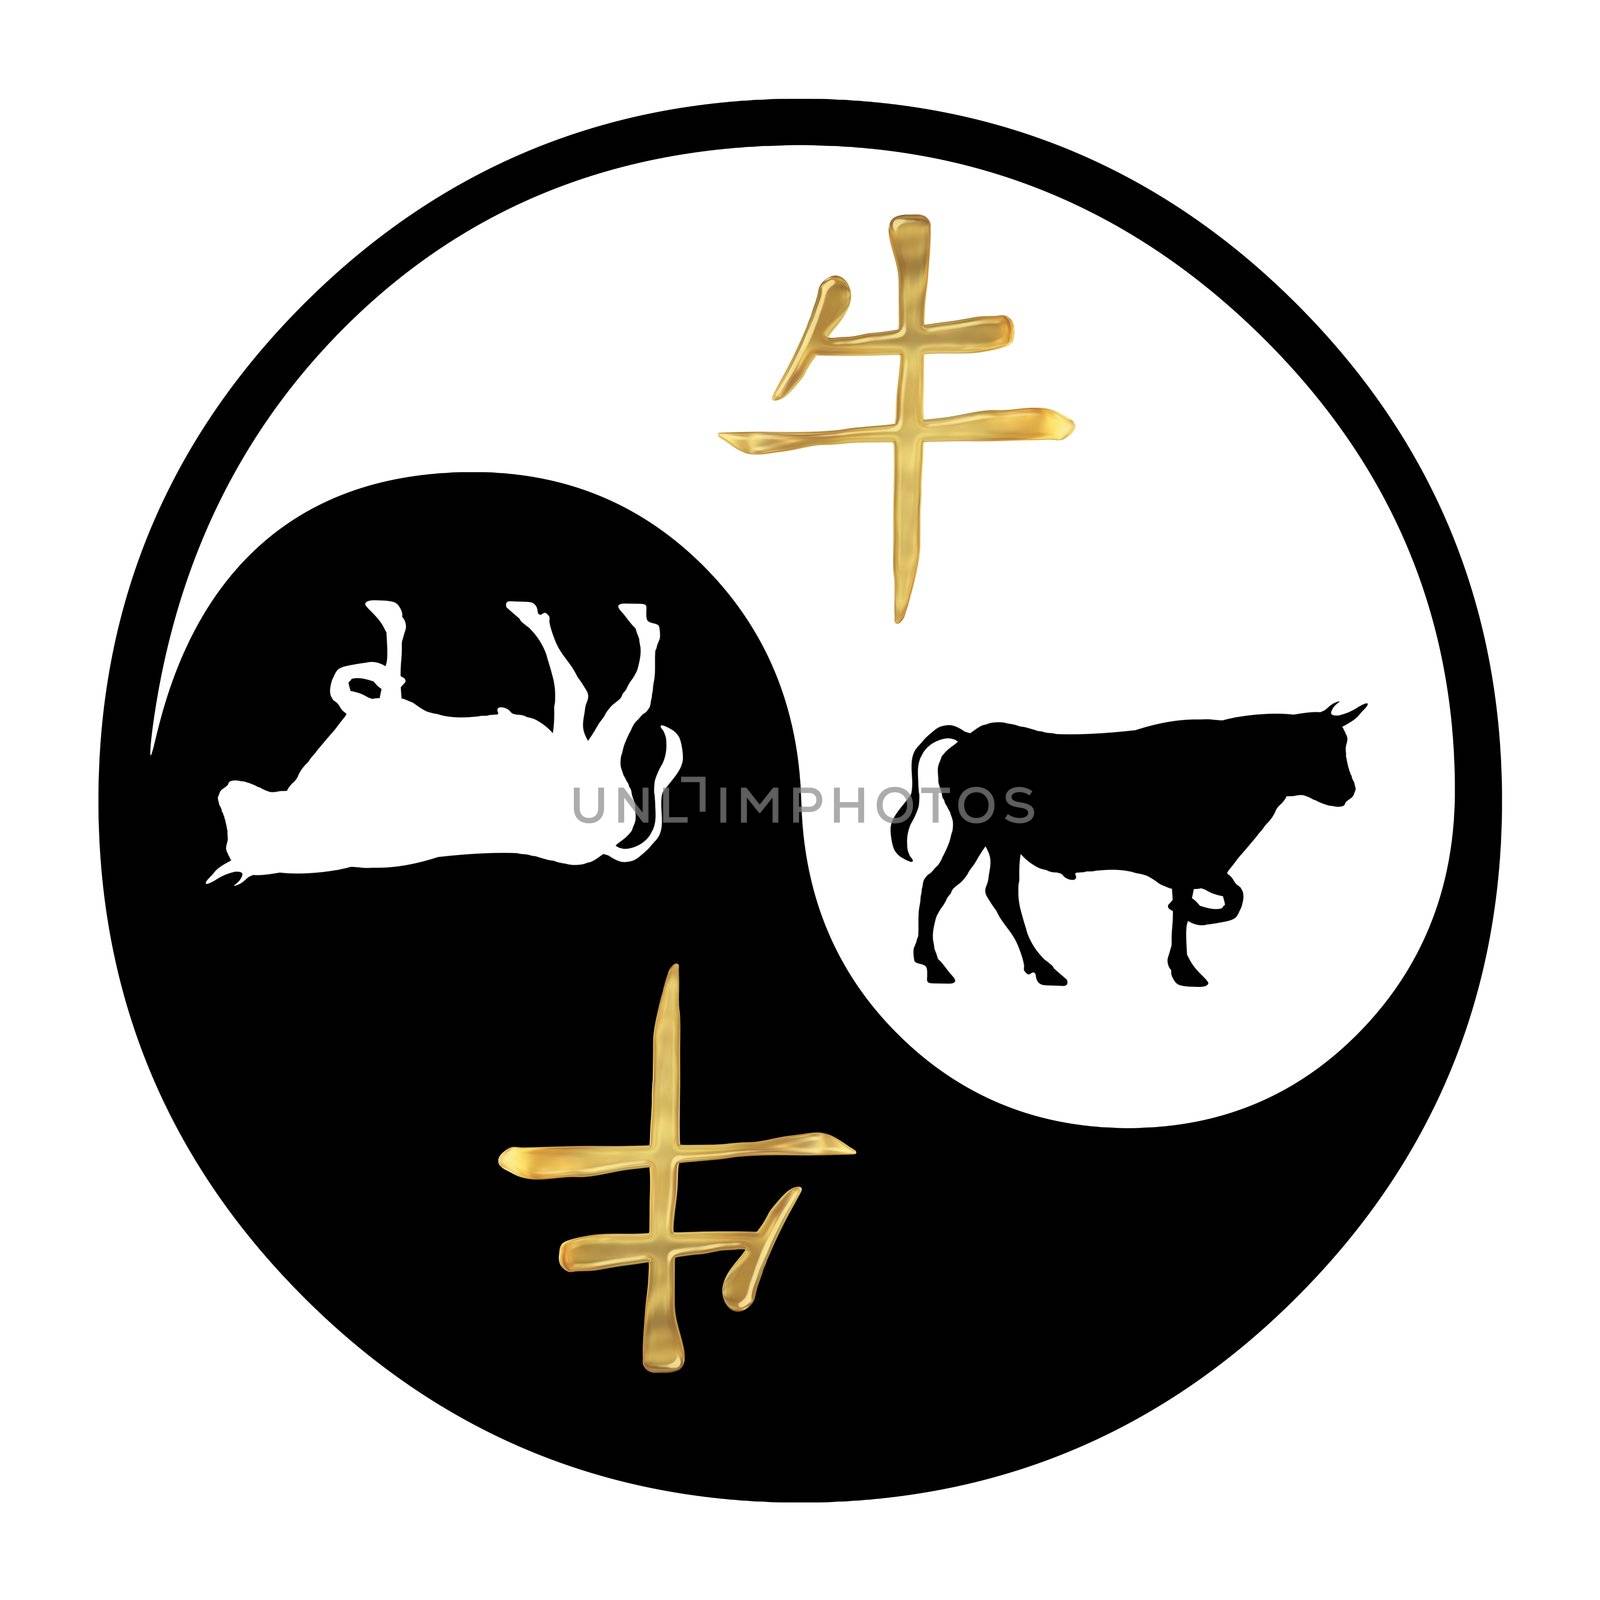 Yin Yang symbol with Chinese text and image of an Ox